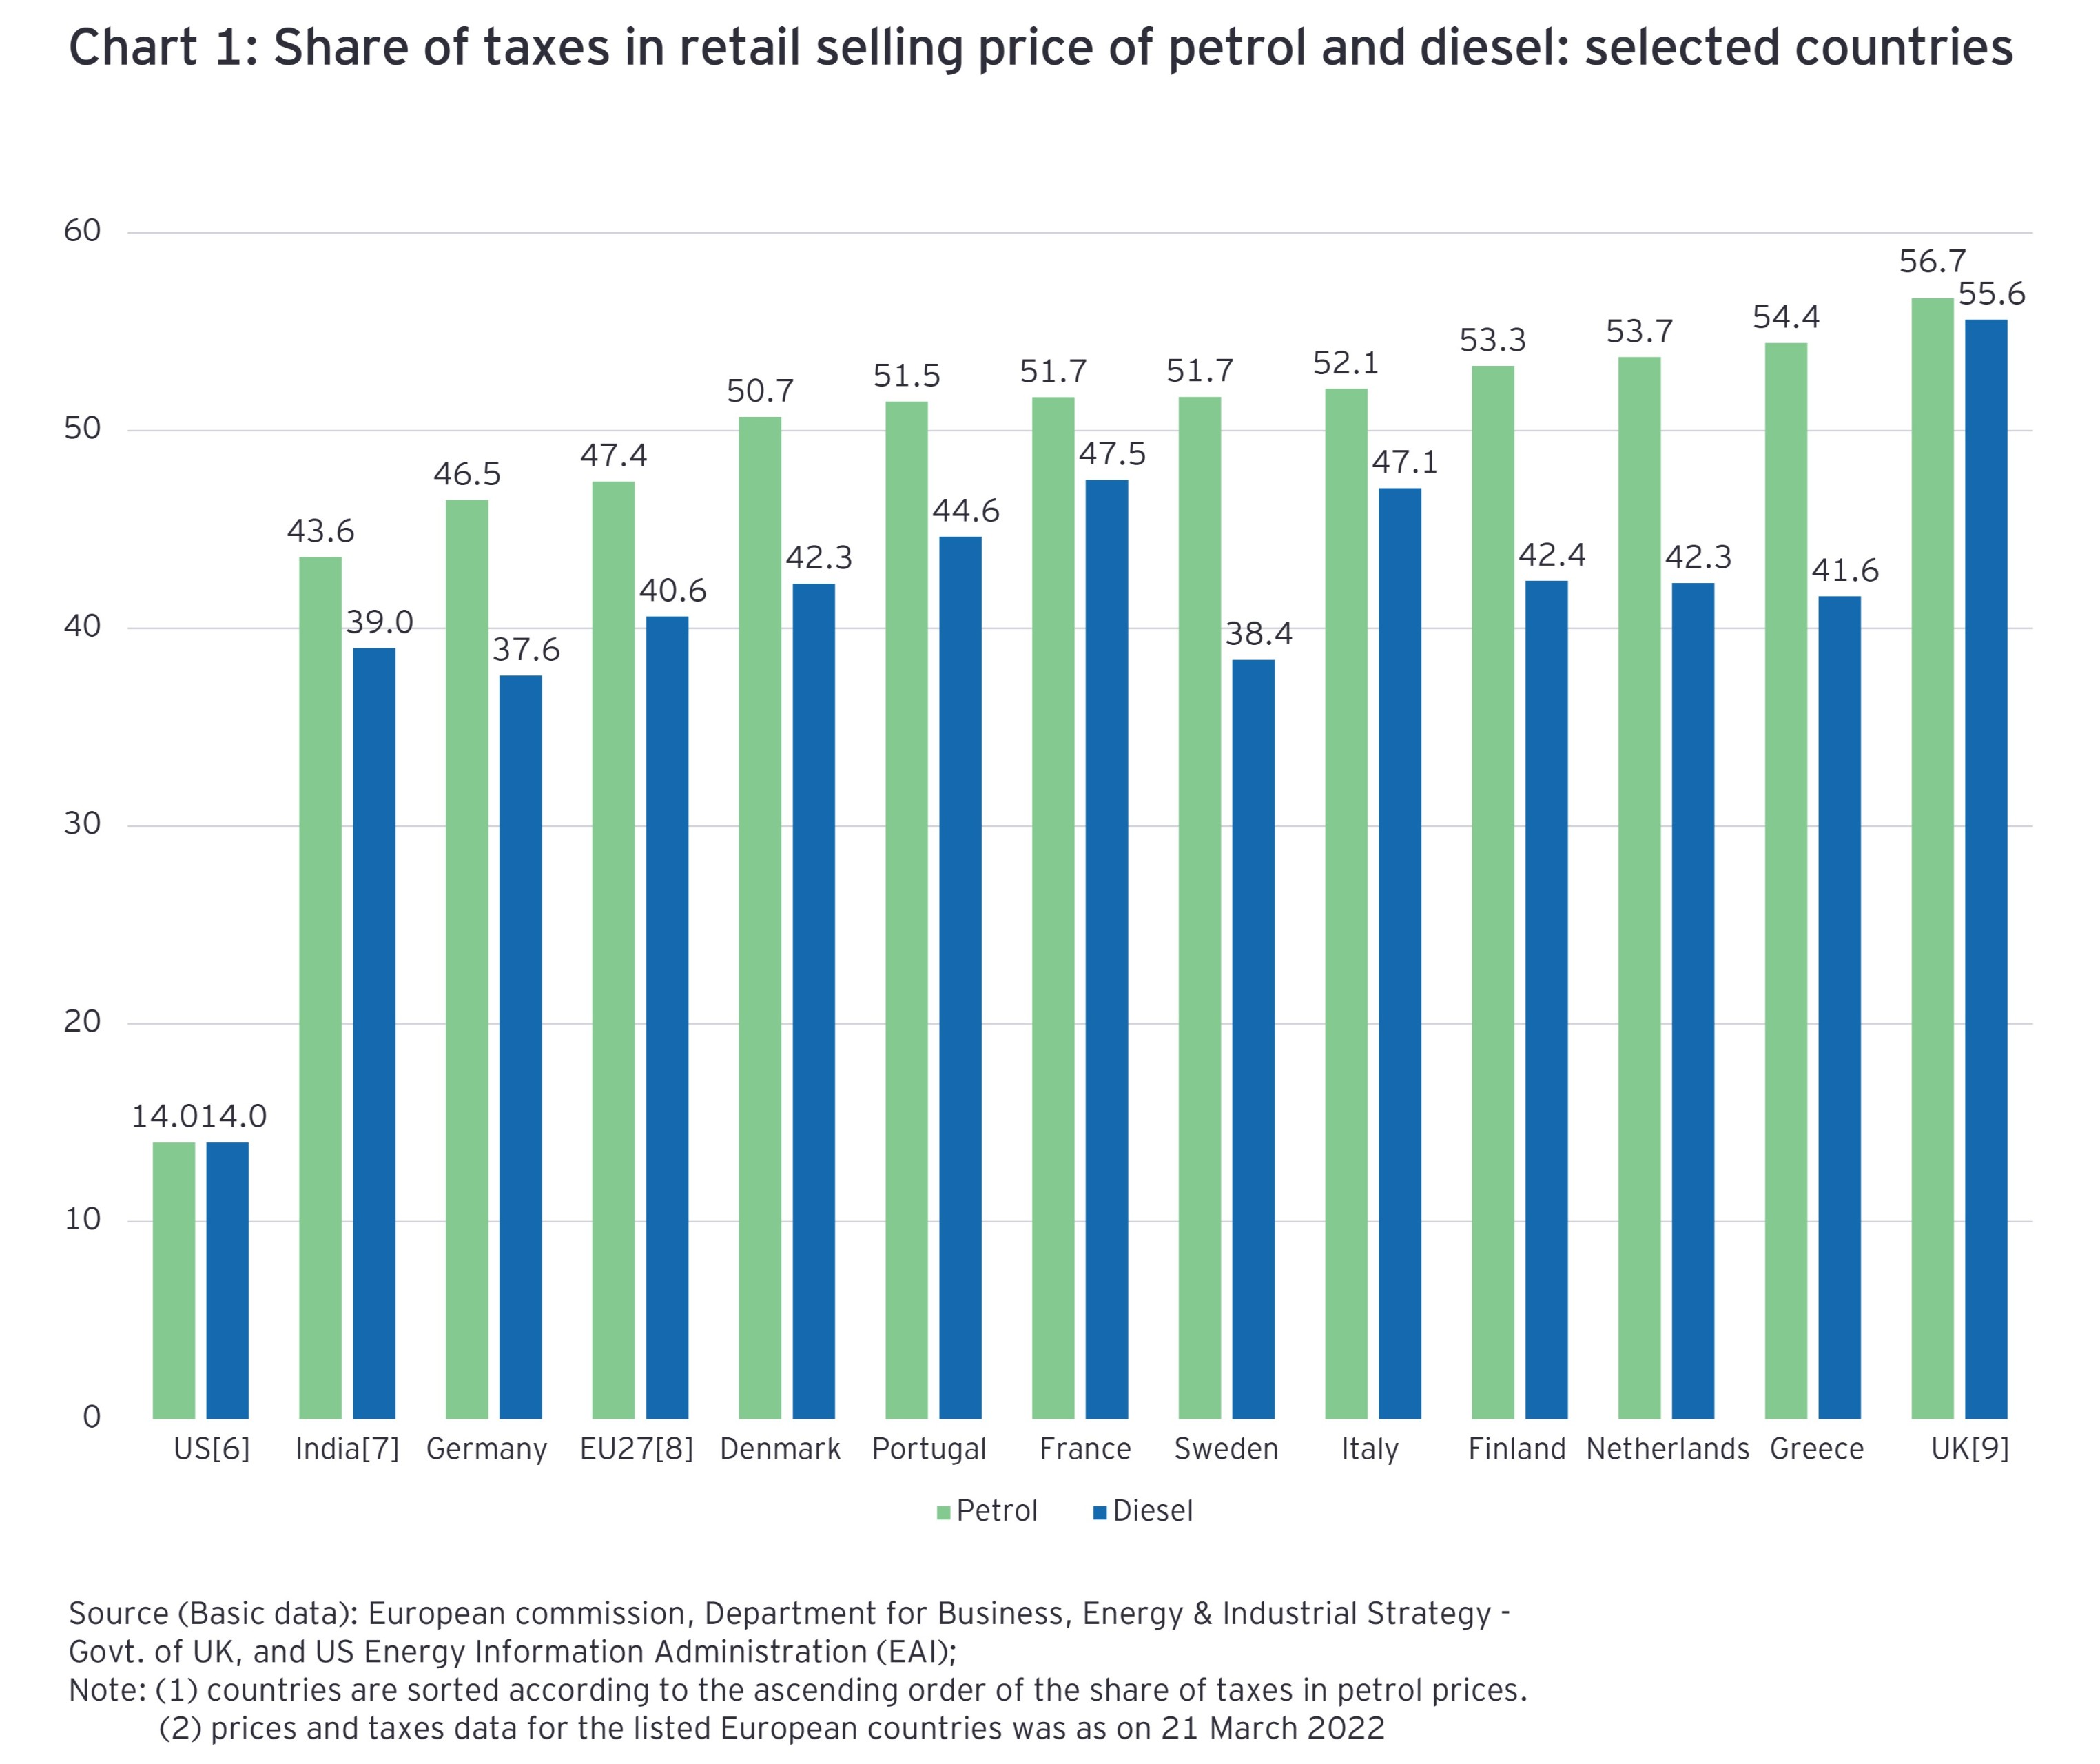 Share of taxes in retail selling price of petrol and diesel: selected countries